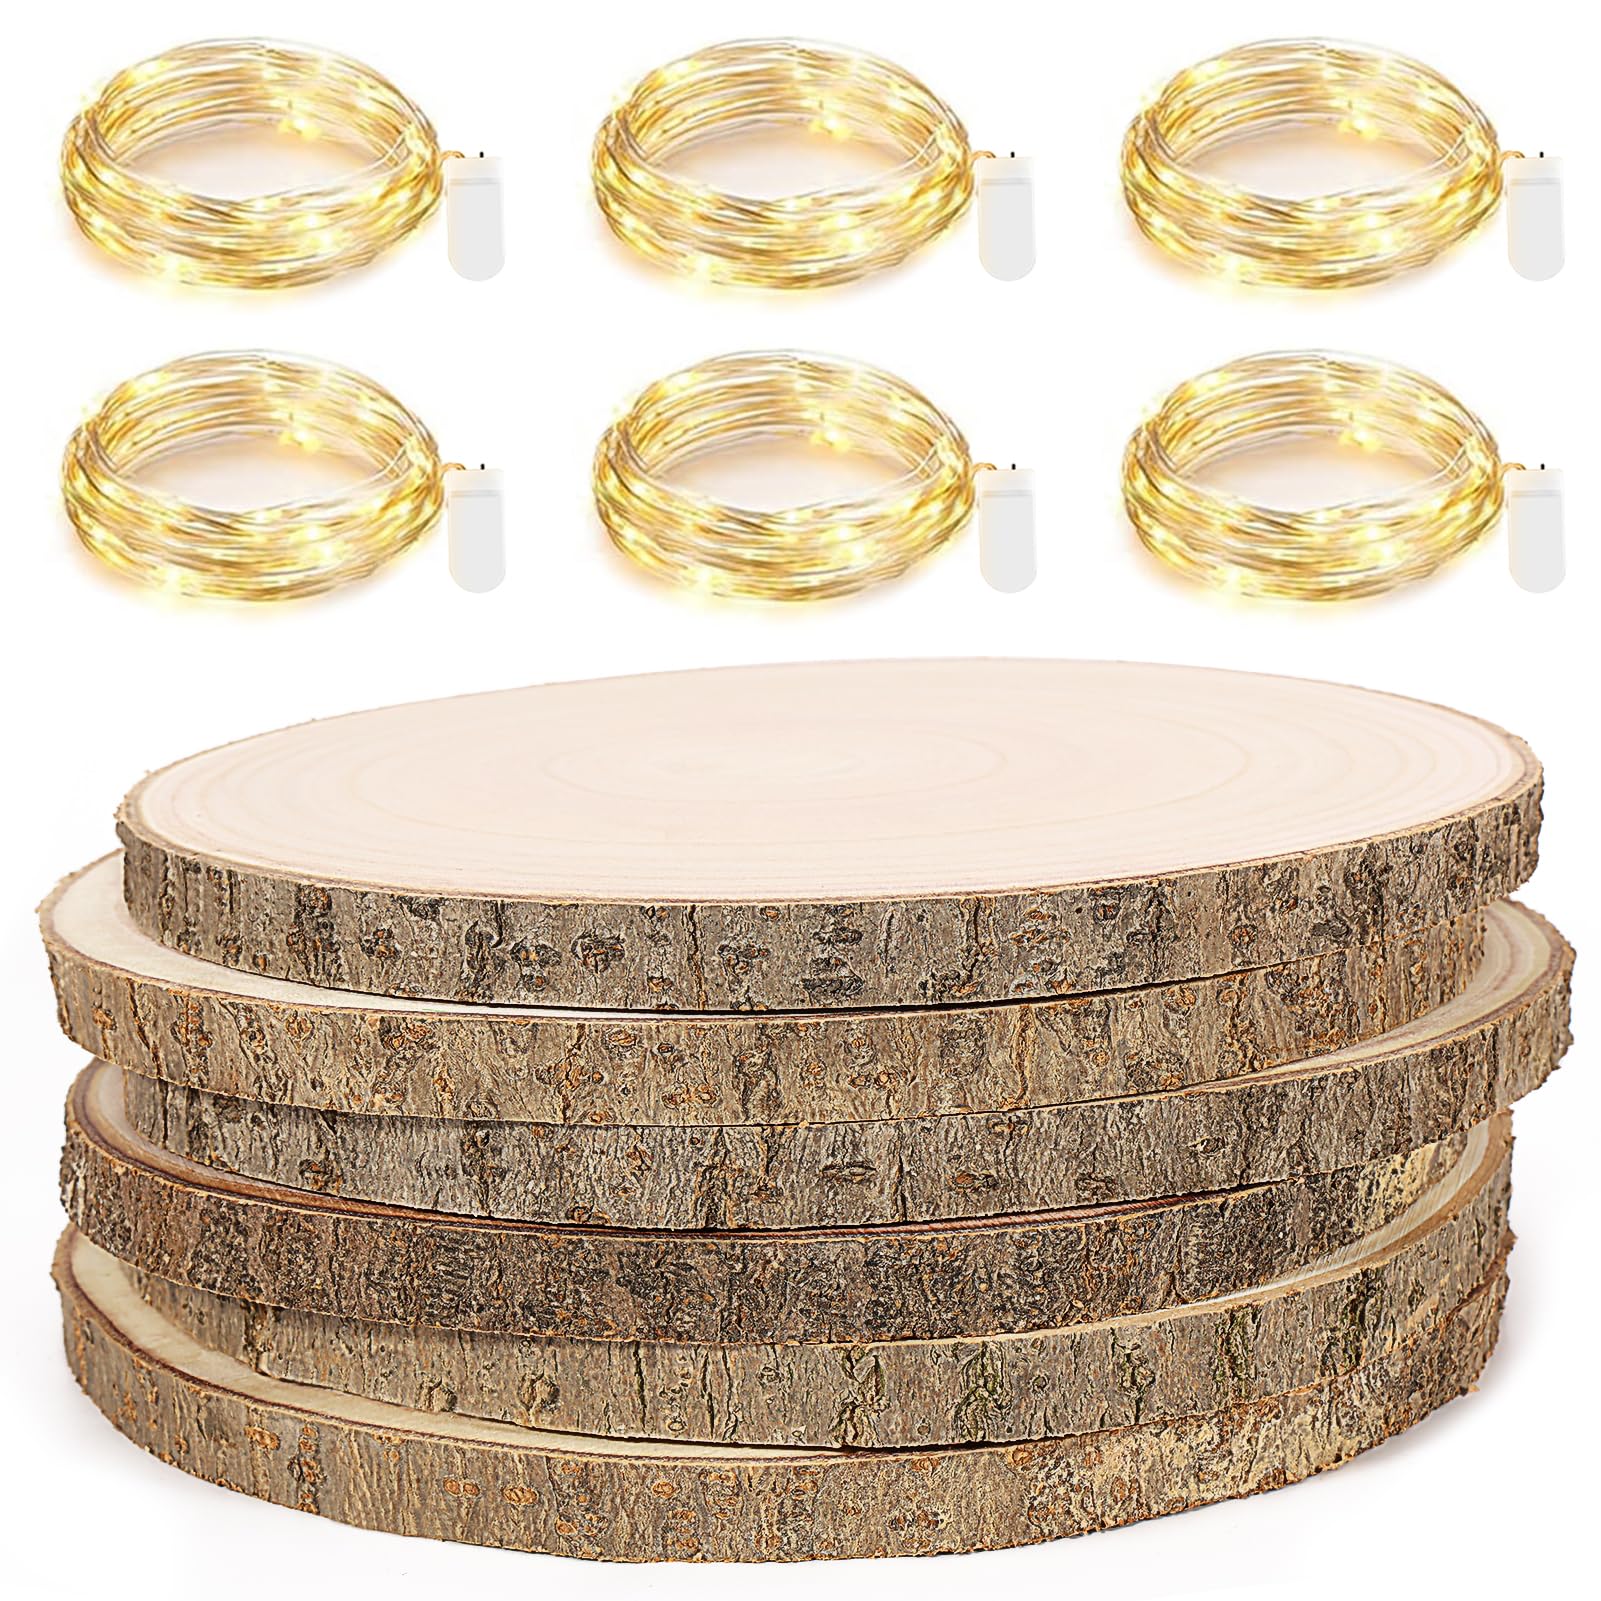  Pllieay 10 Piece 8-9 Inch Wood Slices, with 10 Fairy Lights, Wood  Slices for Centerpieces, Wood Circles for Weddings, Table Centerpieces  Decor and Other DIY Projects